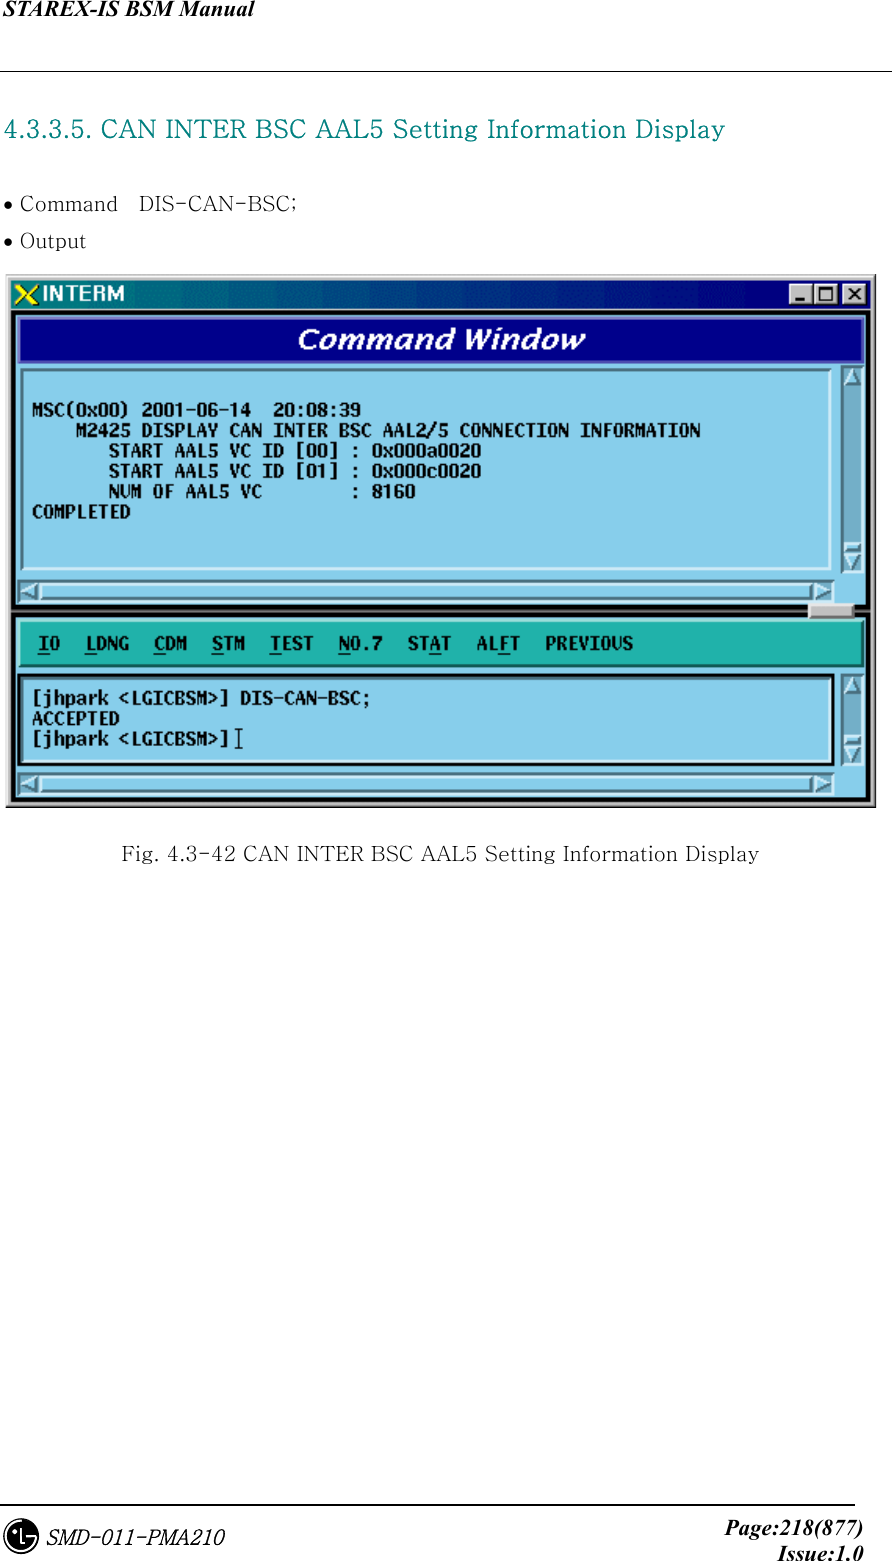 STAREX-IS BSM Manual     Page:218(877)Issue:1.0SMD-011-PMA210  4.3.3.5. CAN INTER BSC AAL5 Setting Information Display  • Command    DIS-CAN-BSC; • Output  Fig. 4.3-42 CAN INTER BSC AAL5 Setting Information Display 